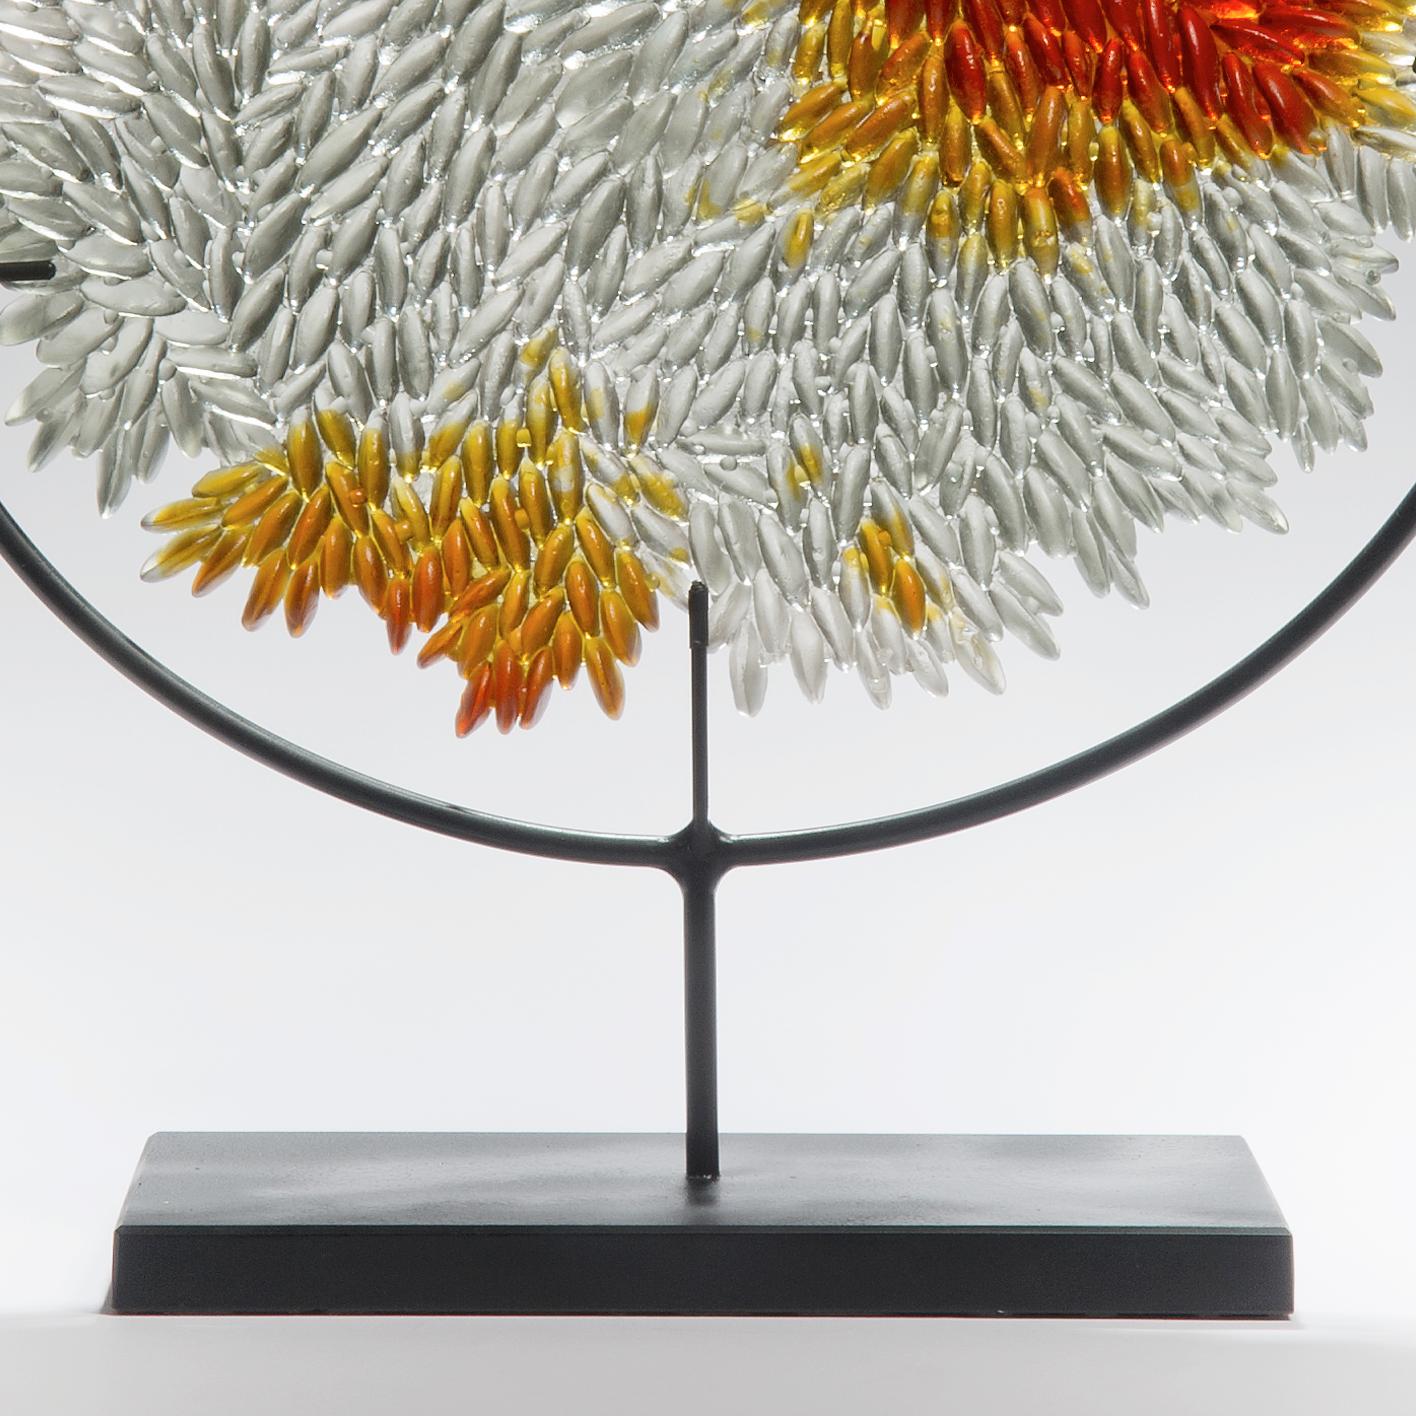 Cast Grown Round, a Textured Glass Sculpture in Clear & Amber by Nina Casson McGarva